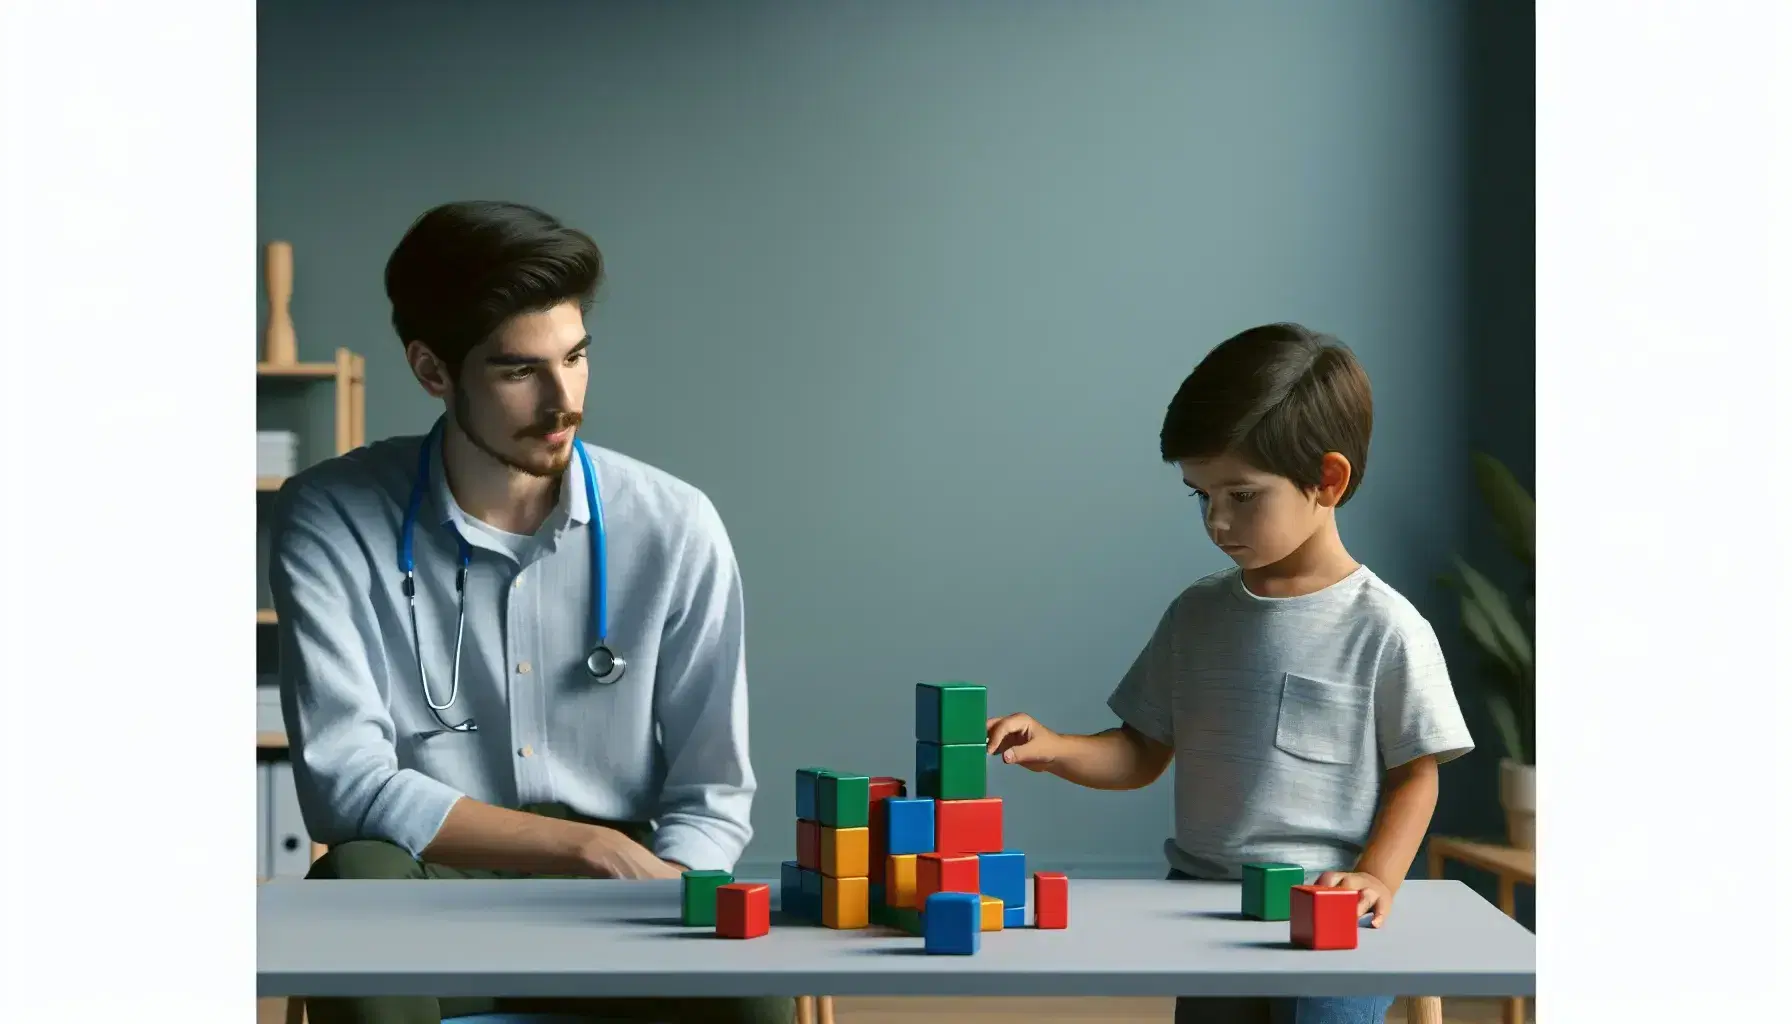 Hispanic boy engaging in behavioral therapy with colored blocks under the watchful gaze of a healthcare professional in serene clinical setting.